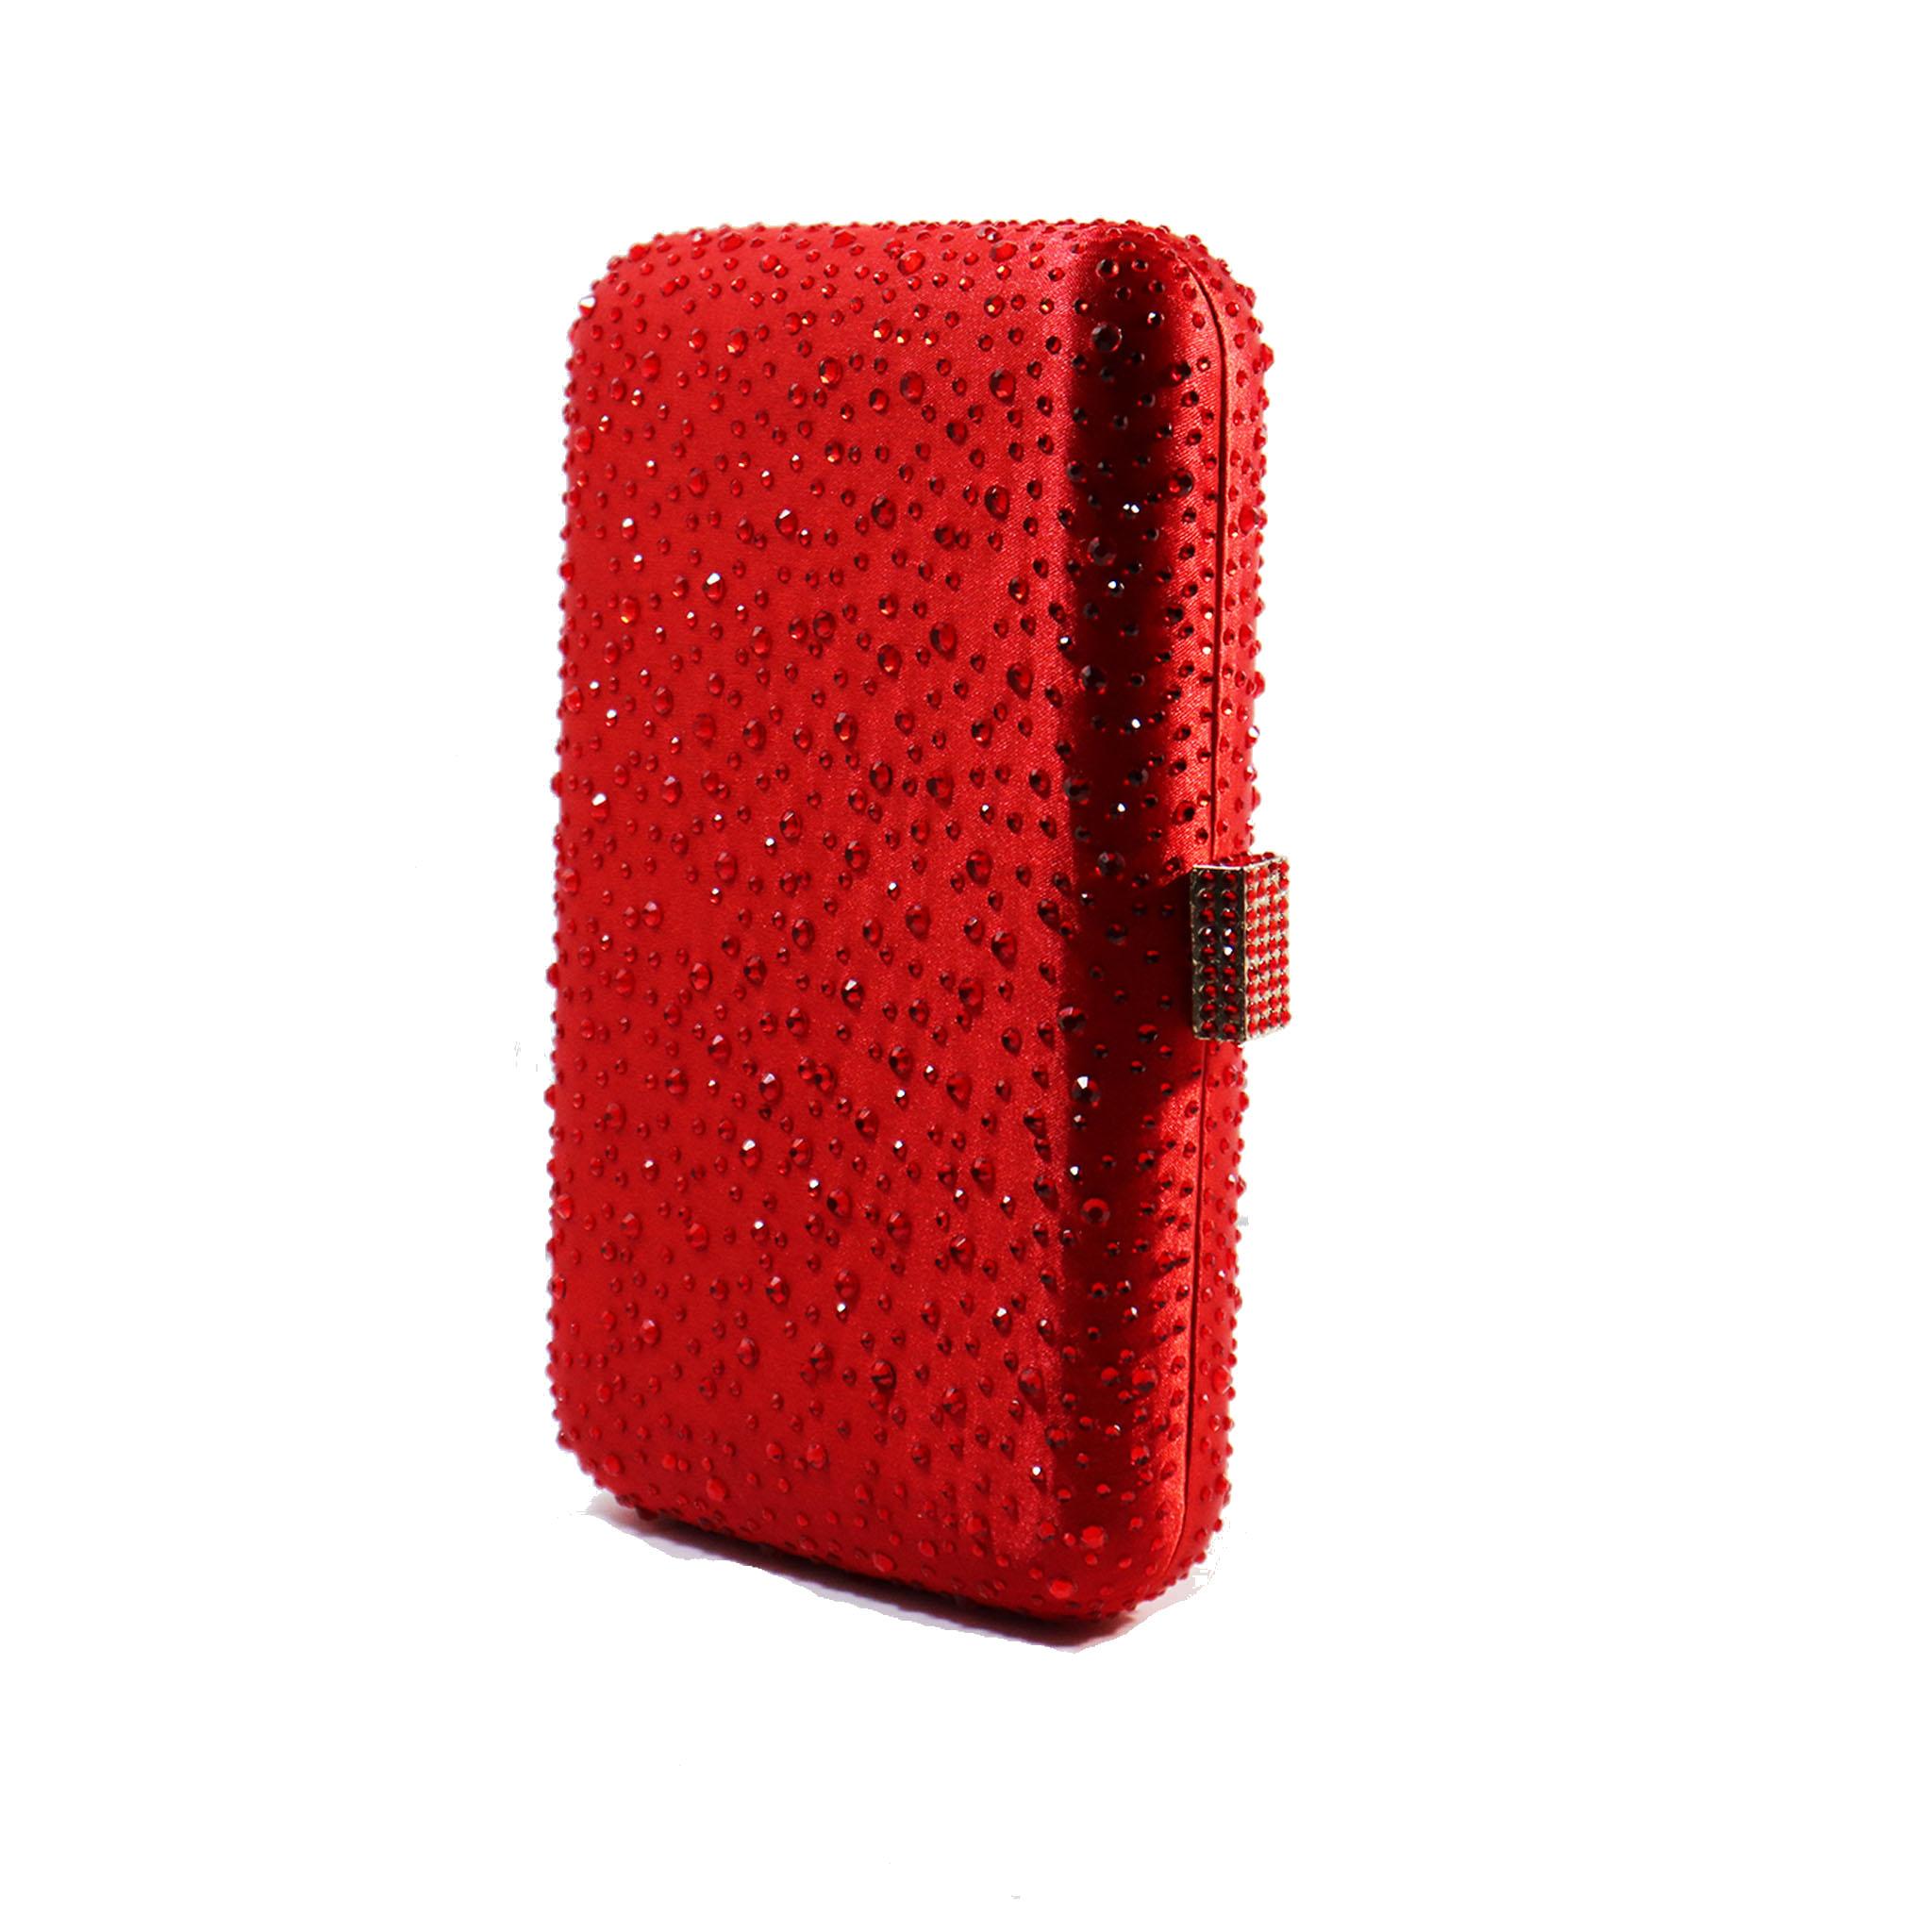 'Small' Red Pave Rhinestone Evening Clutch with Crossbody Shoulder Chain 

Measurements: 
Length: 8 in.
Width:  2 in.
Height: 5 in. 